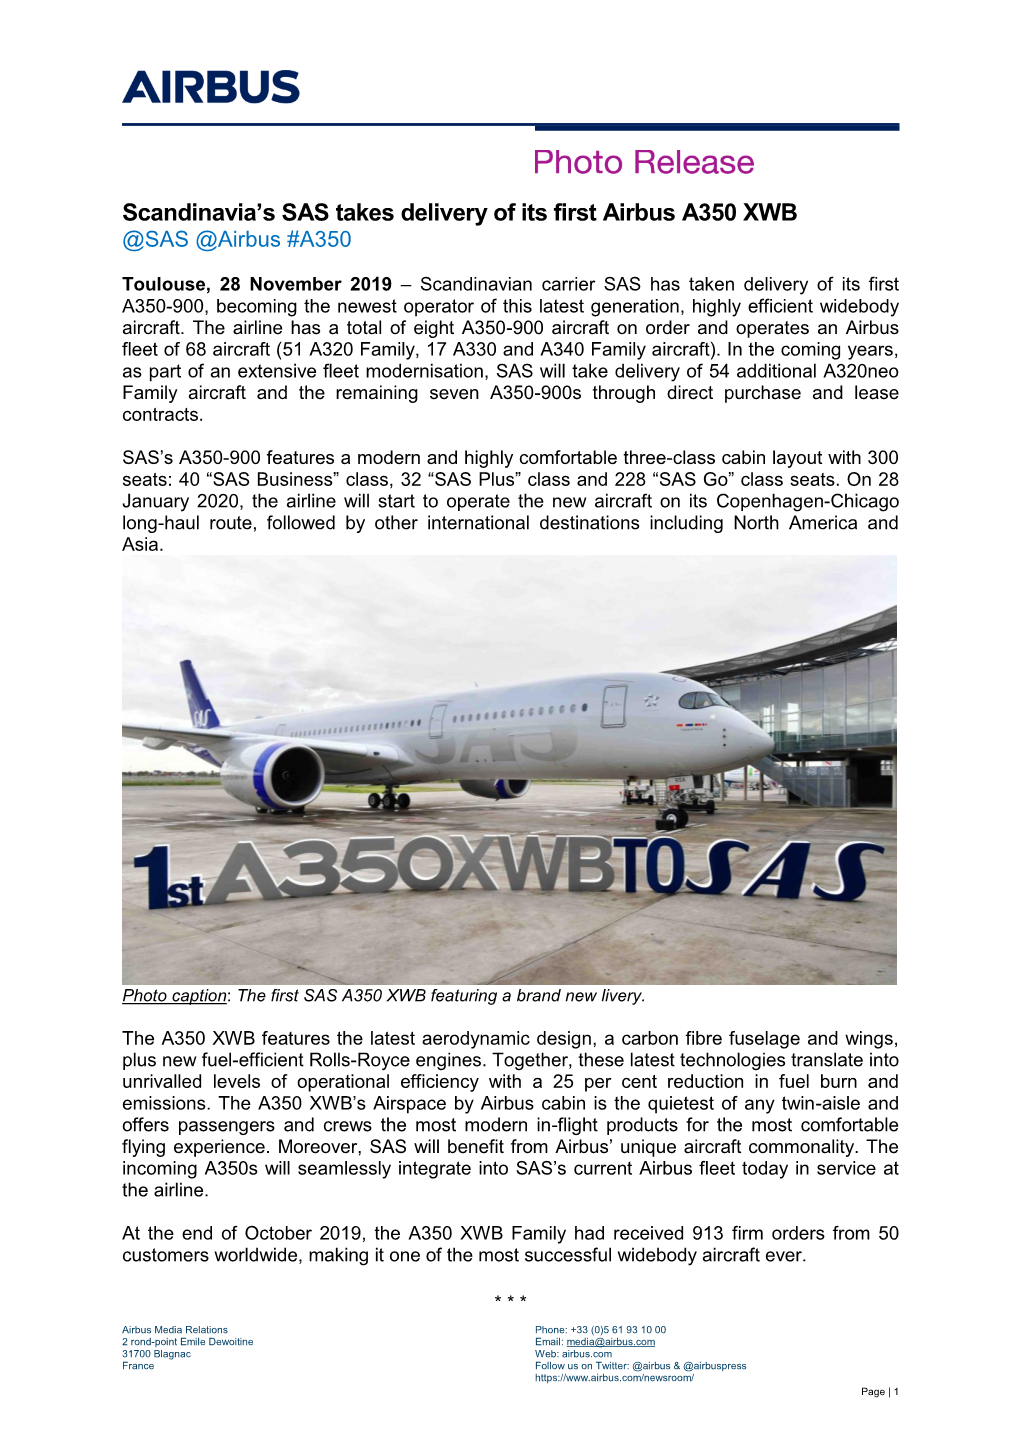 Scandinavia's SAS Takes Delivery of Its First Airbus A350